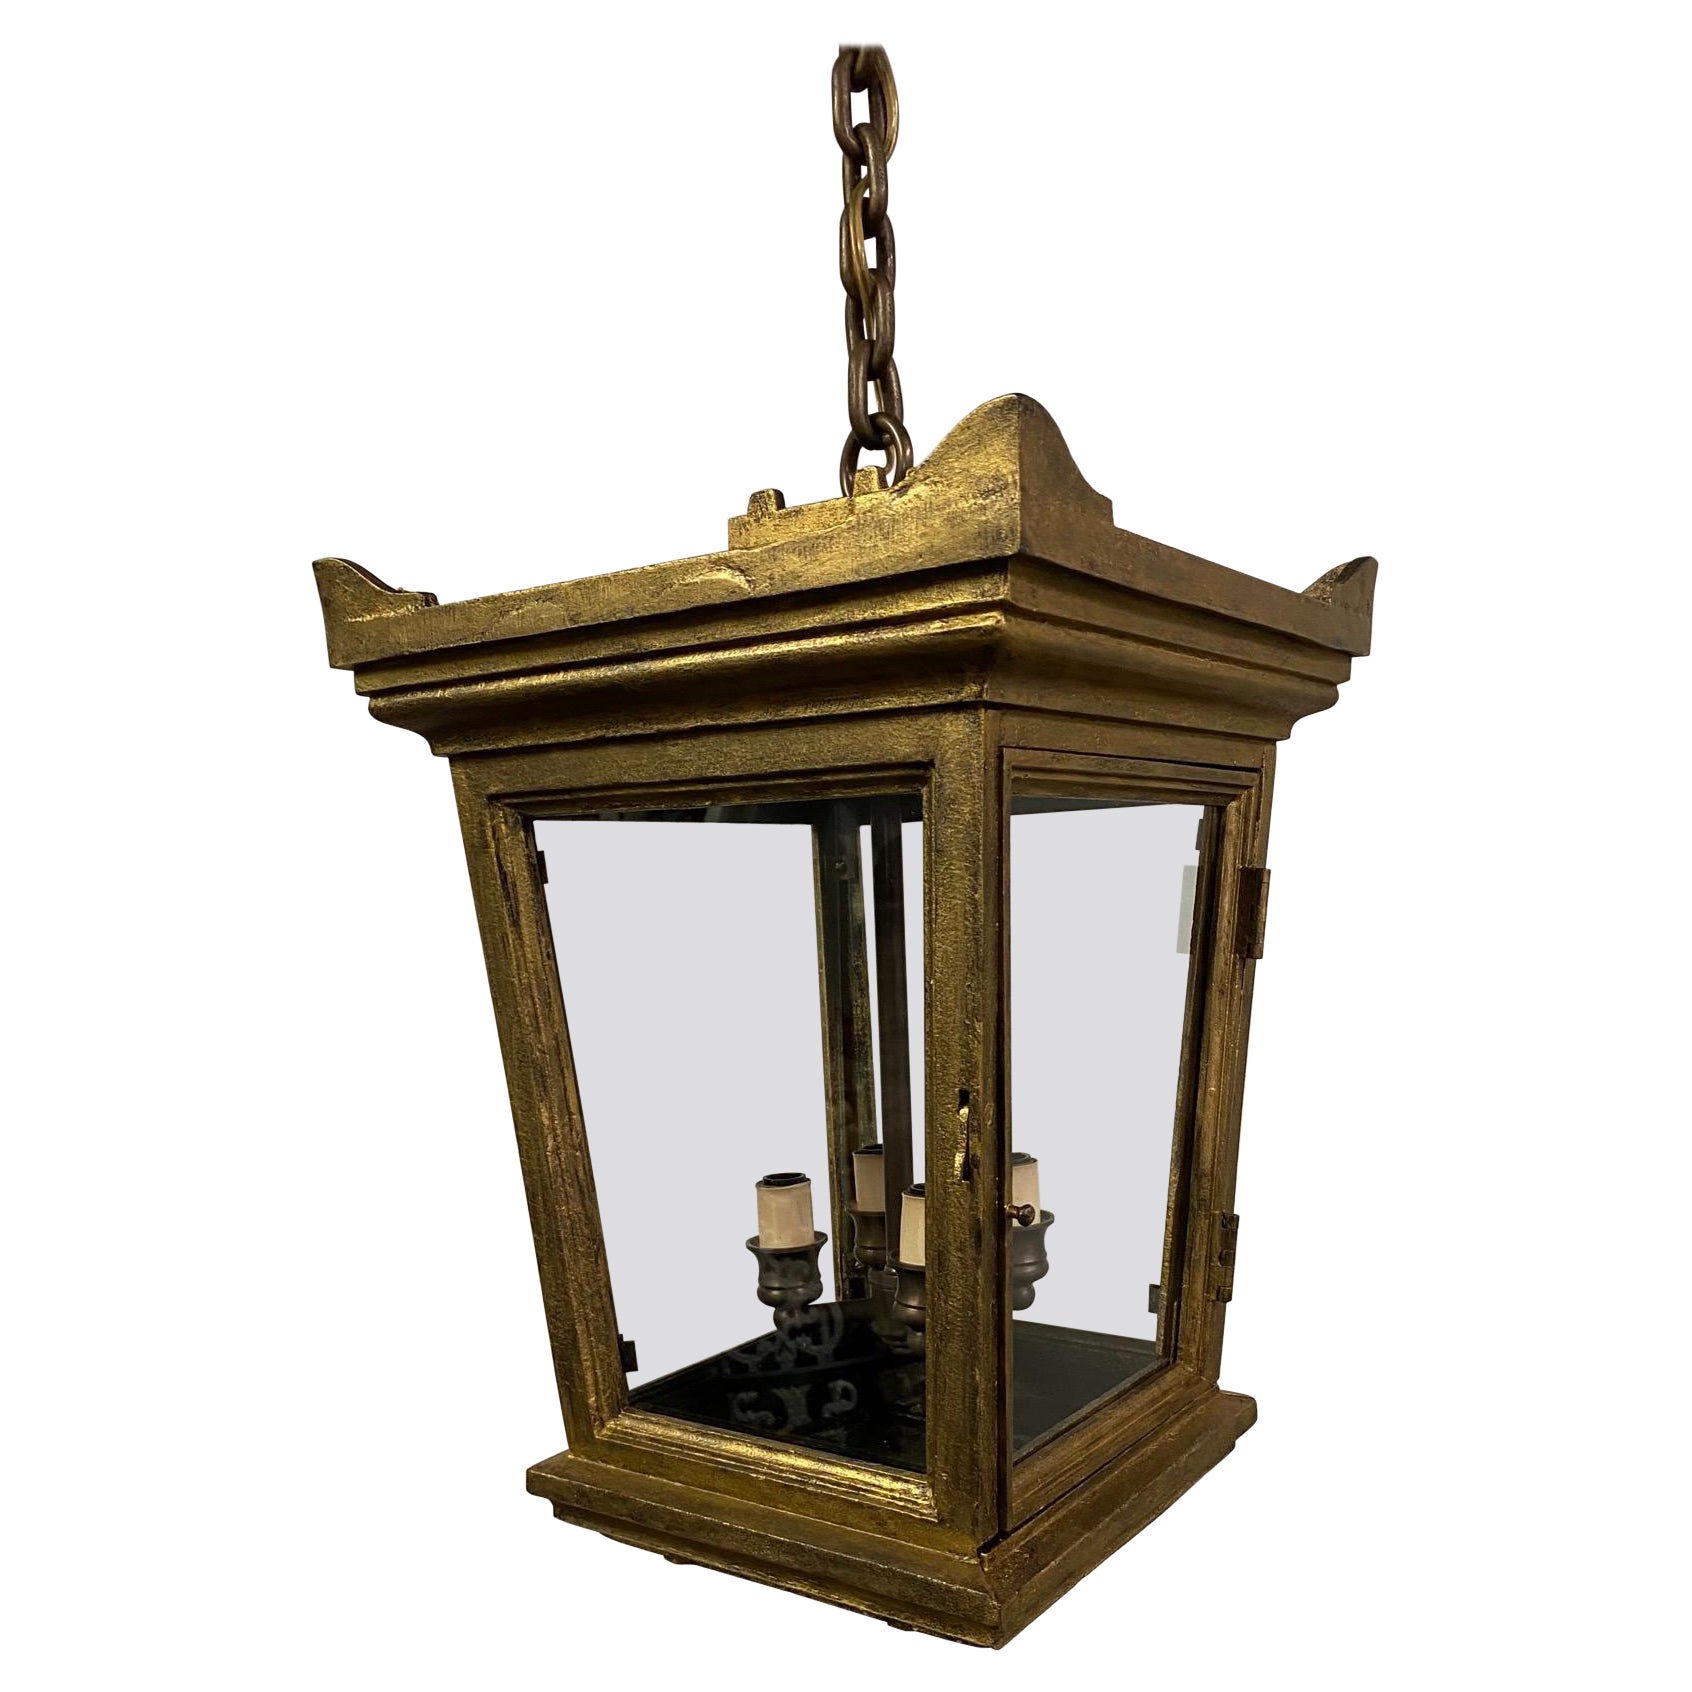 Antique Gold Toned Regency Style Iron Hanging Lantern For Sale